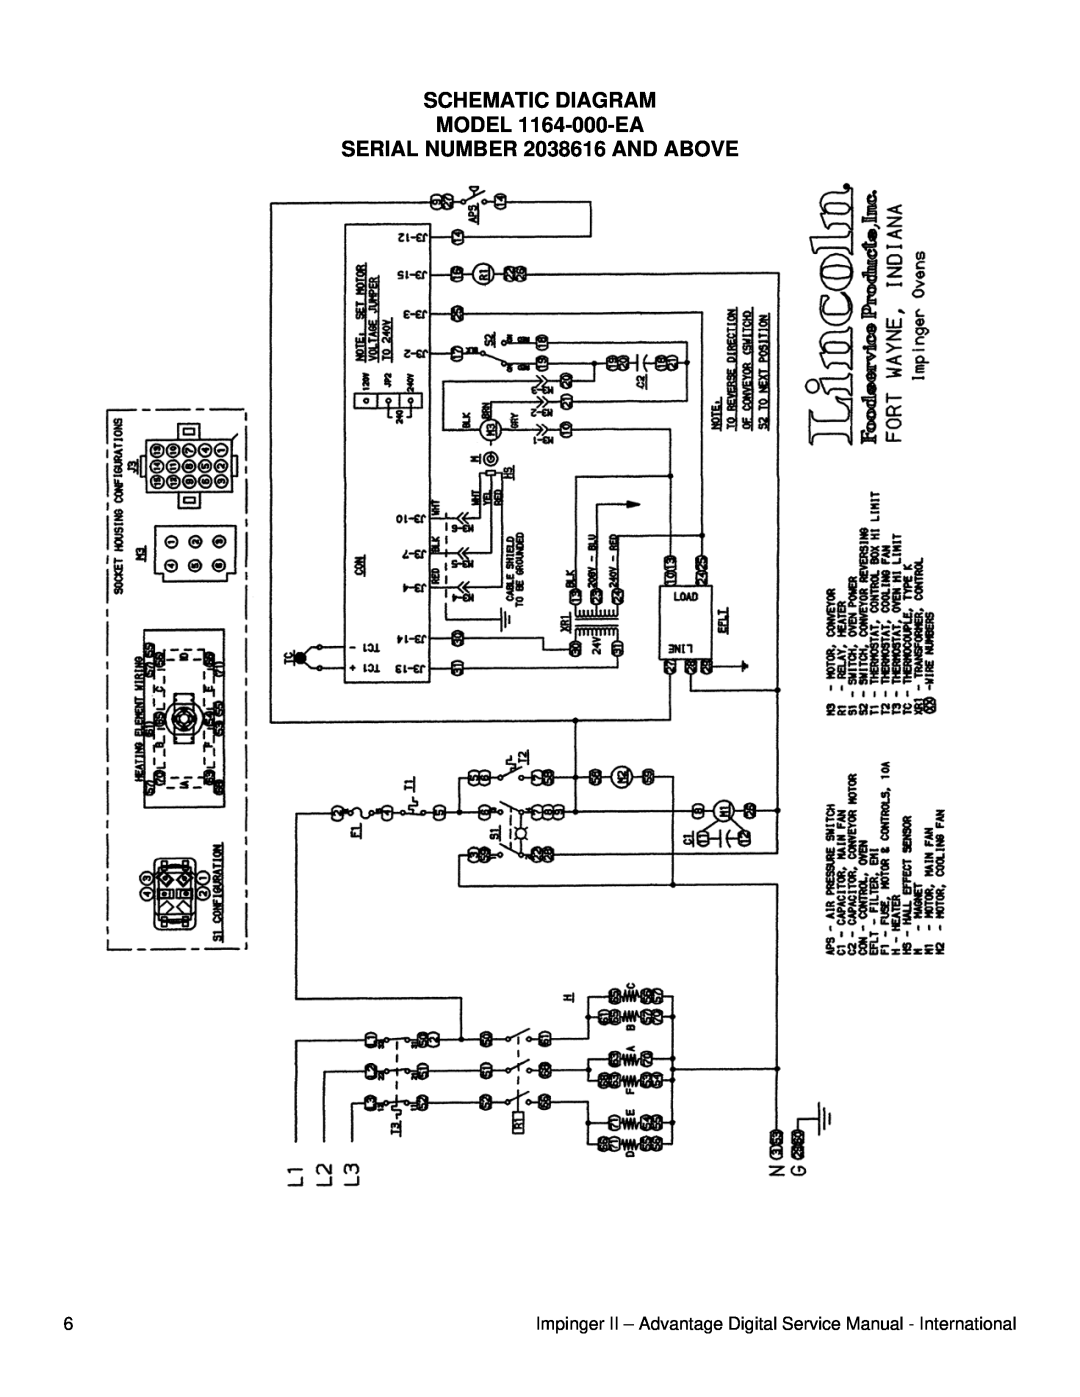 Lincoln 1154-000-EA, 1155-000-EA service manual SCHEMATIC DIAGRAM MODEL 1164-000-EA, SERIAL NUMBER 2038616 AND ABOVE 